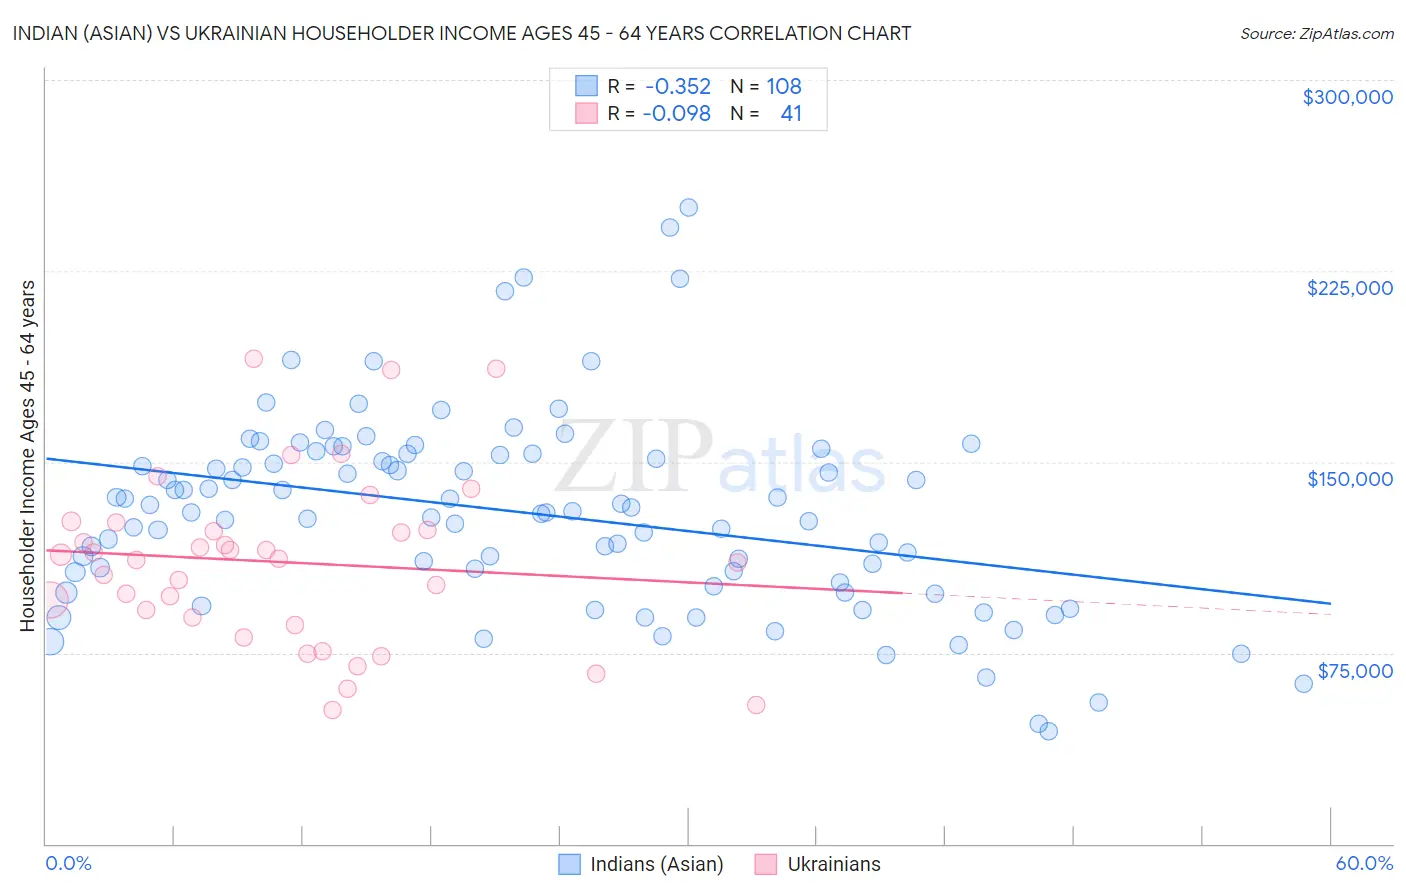 Indian (Asian) vs Ukrainian Householder Income Ages 45 - 64 years